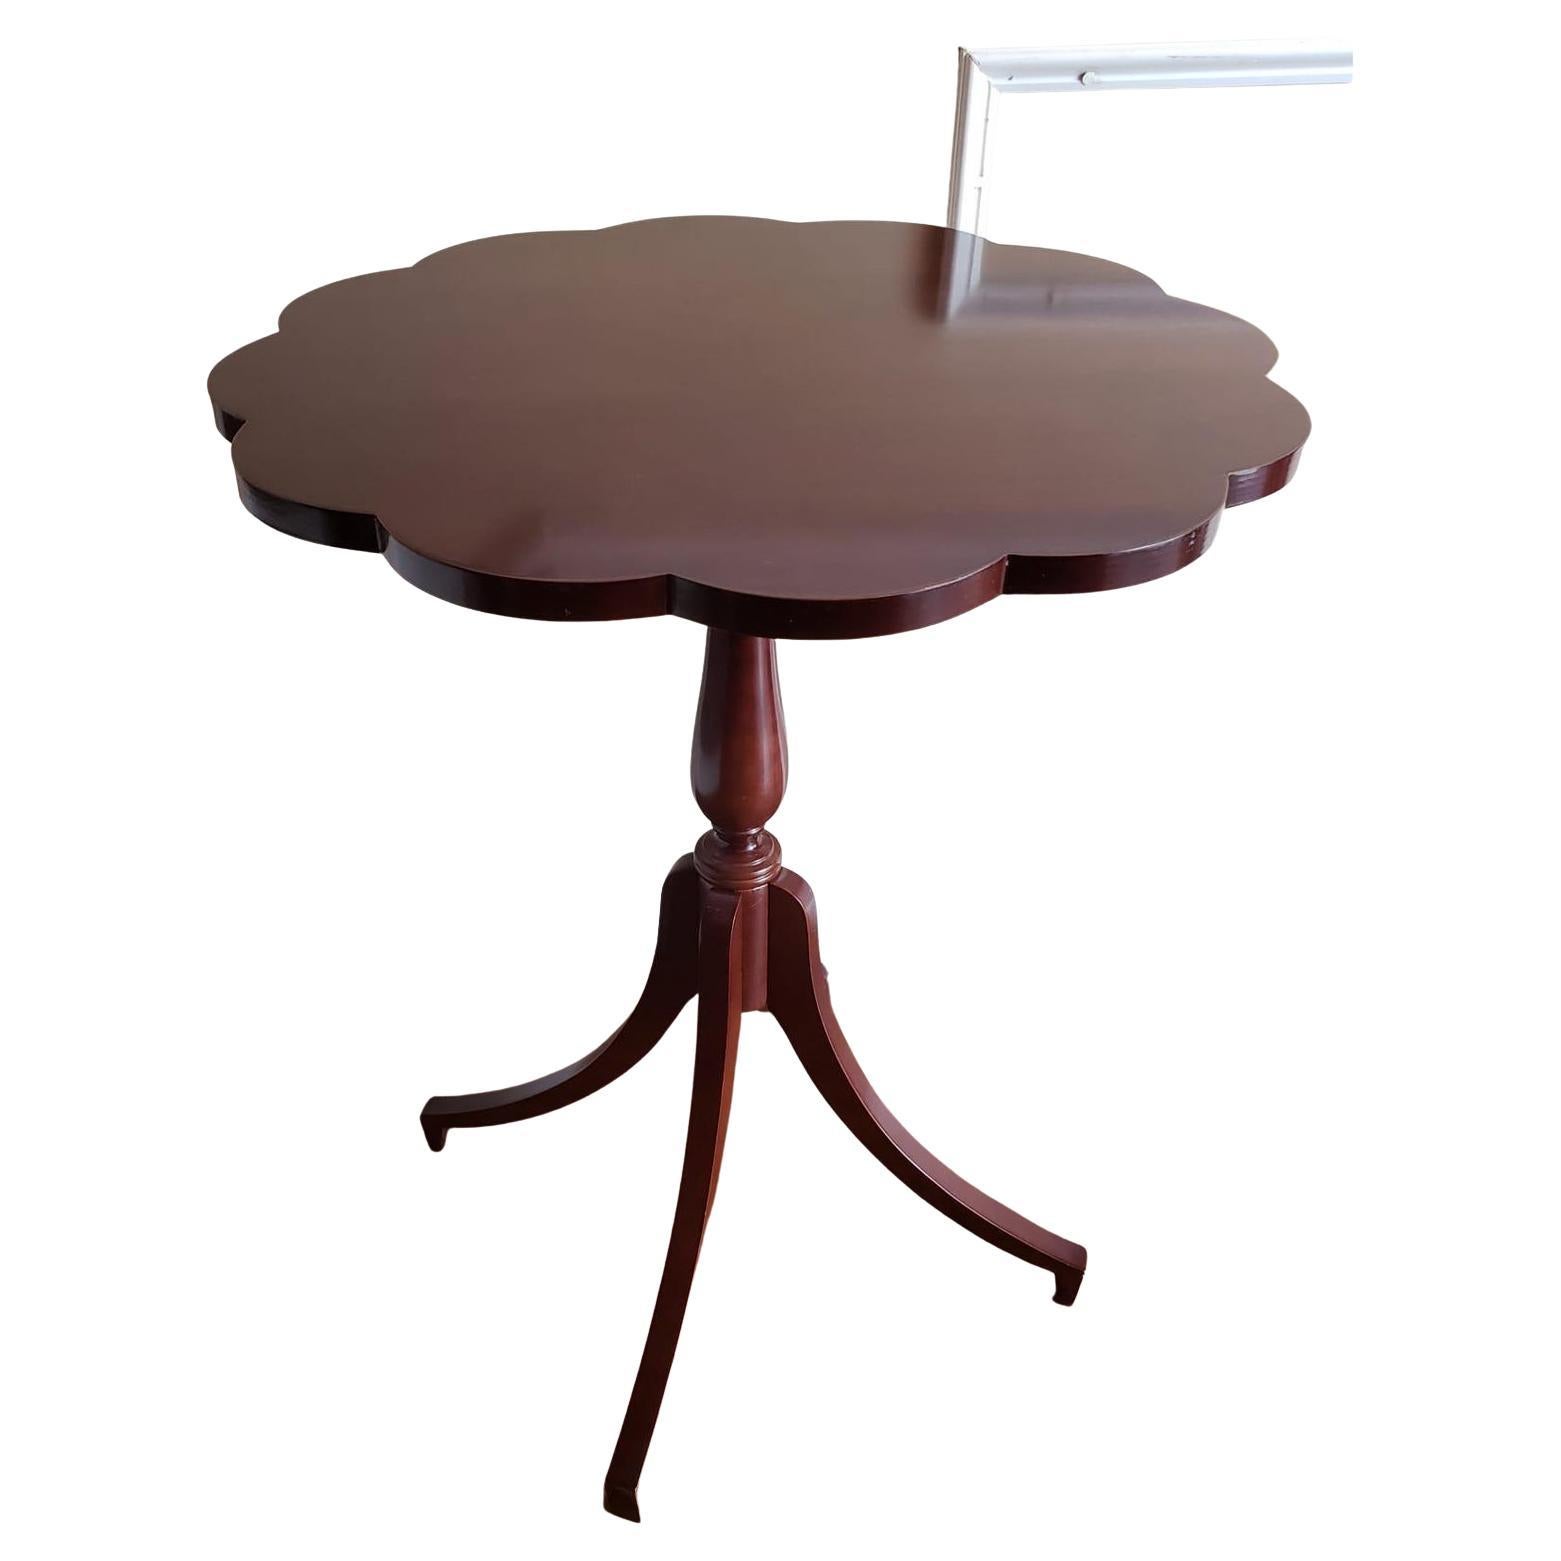 Modern Bombay Mahogany Stained Wood Scallop Edge Accent Table, Circa 1993